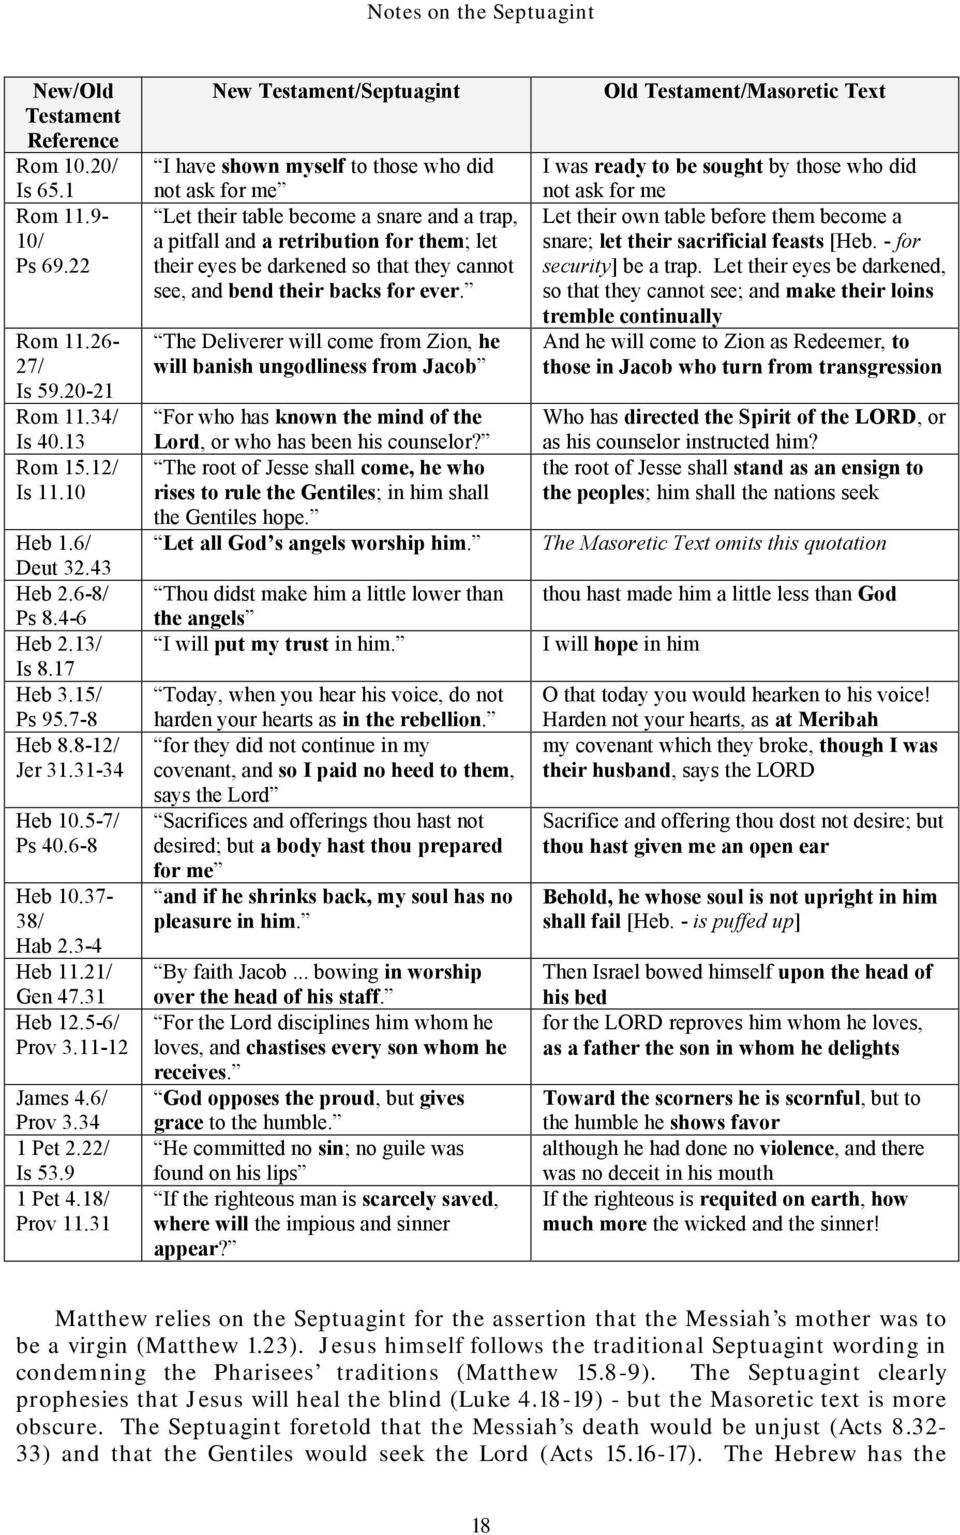 31 New Testament/Septuagint I have shown myself to those who did not ask for me Let their table become a snare and a trap, a pitfall and a retribution for them; let their eyes be darkened so that